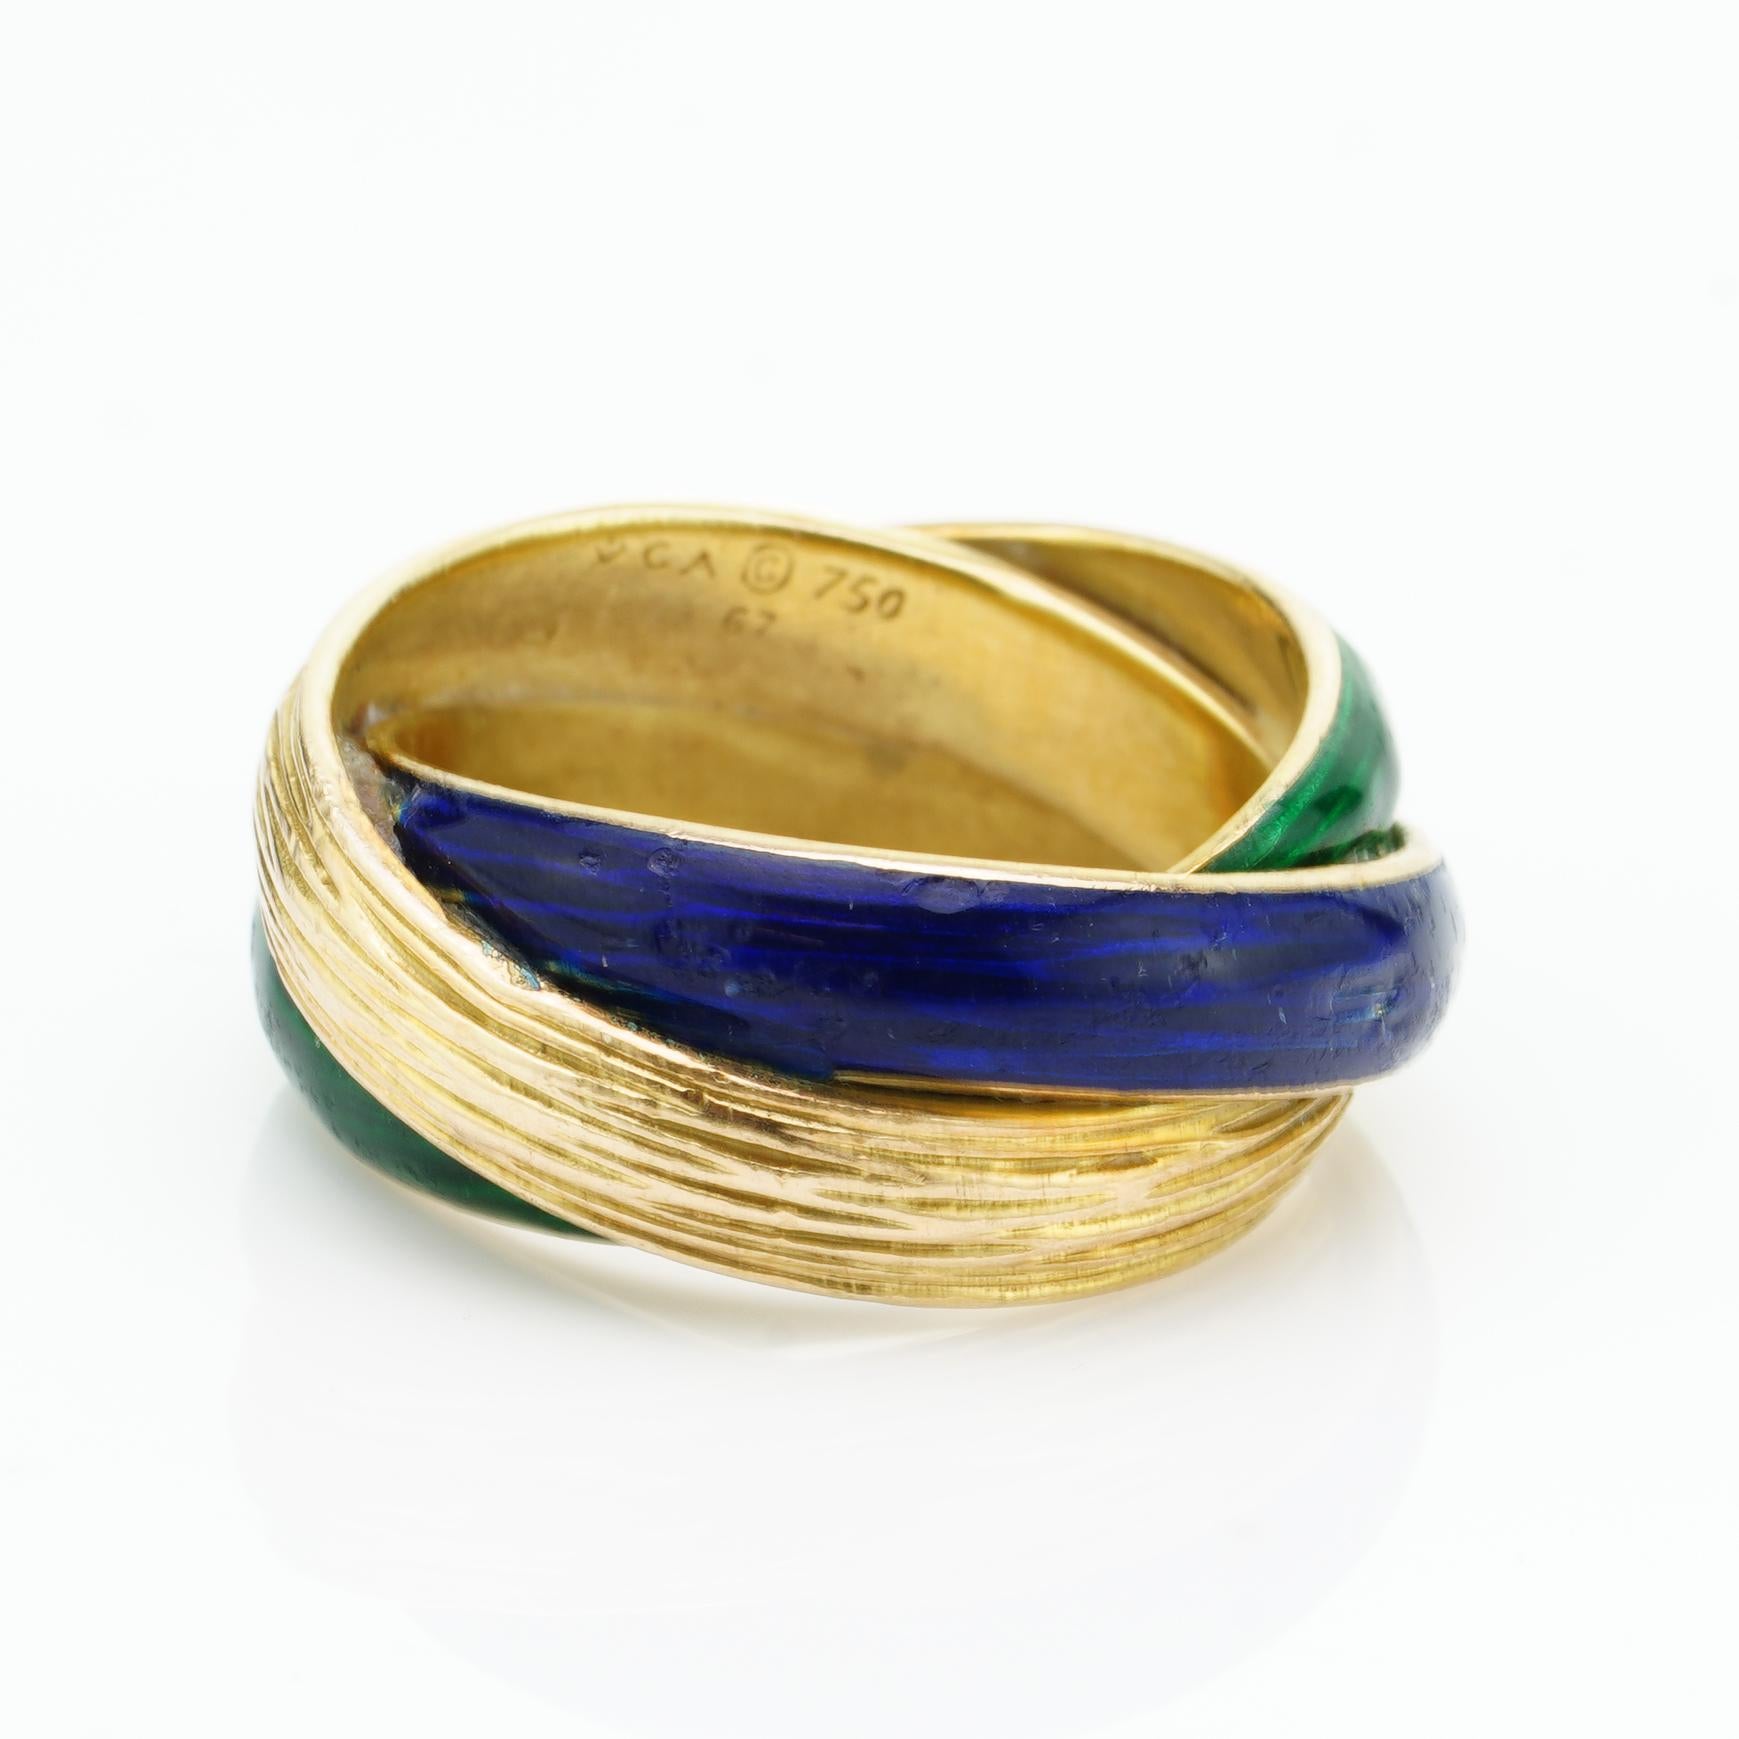 Vintage Van Cleef & Arpels 18kt, Yellow Gold, Twisted Red and Blue Enamel Ring 1